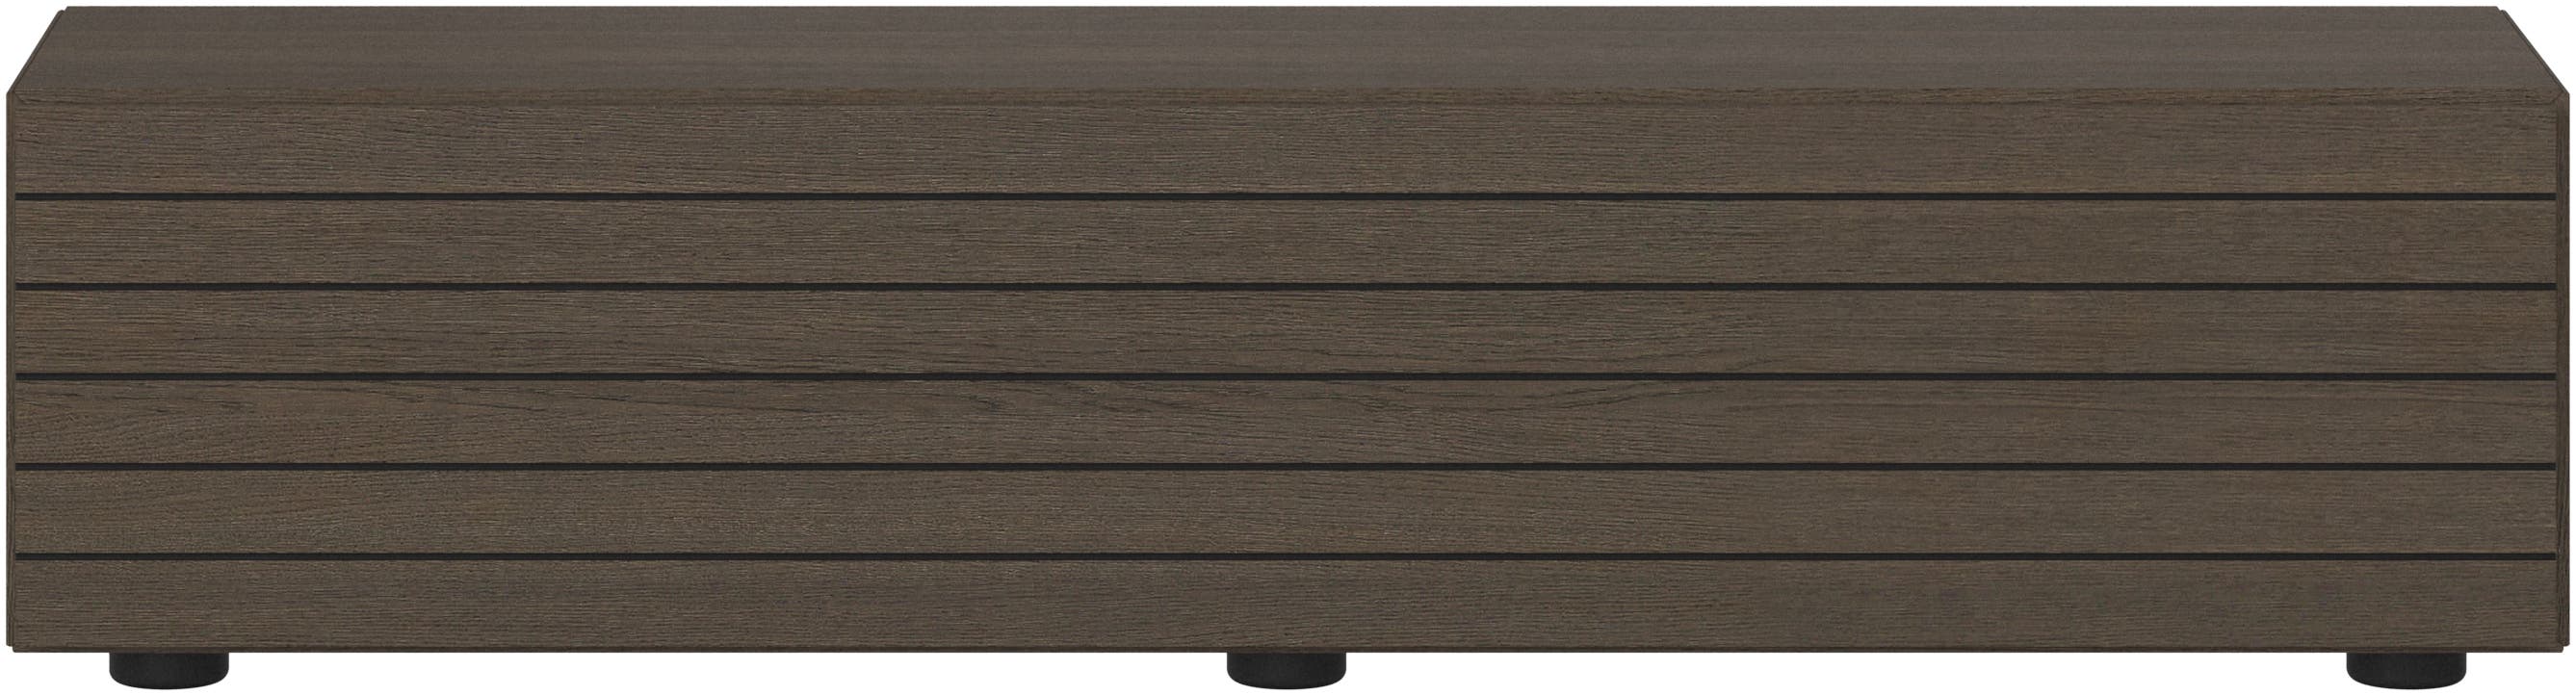 Lugano wall mounted cabinet with drop down door